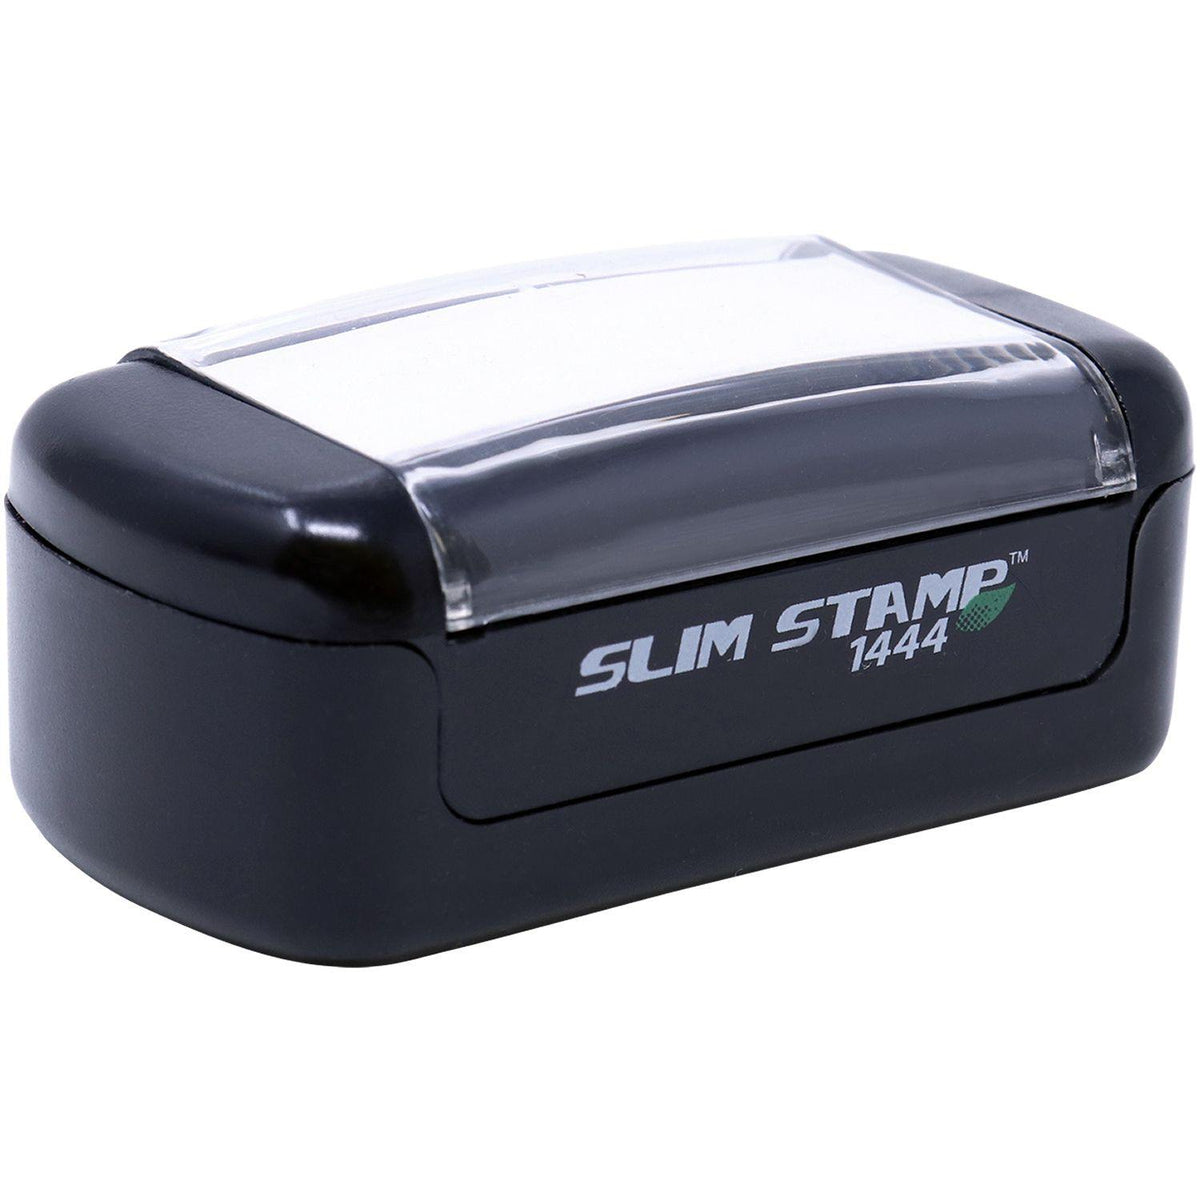 Slim Pre-Inked Additional Postage Required Stamp - Engineer Seal Stamps - Brand_Slim, Impression Size_Small, Stamp Type_Pre-Inked Stamp, Type of Use_Postal &amp; Mailing